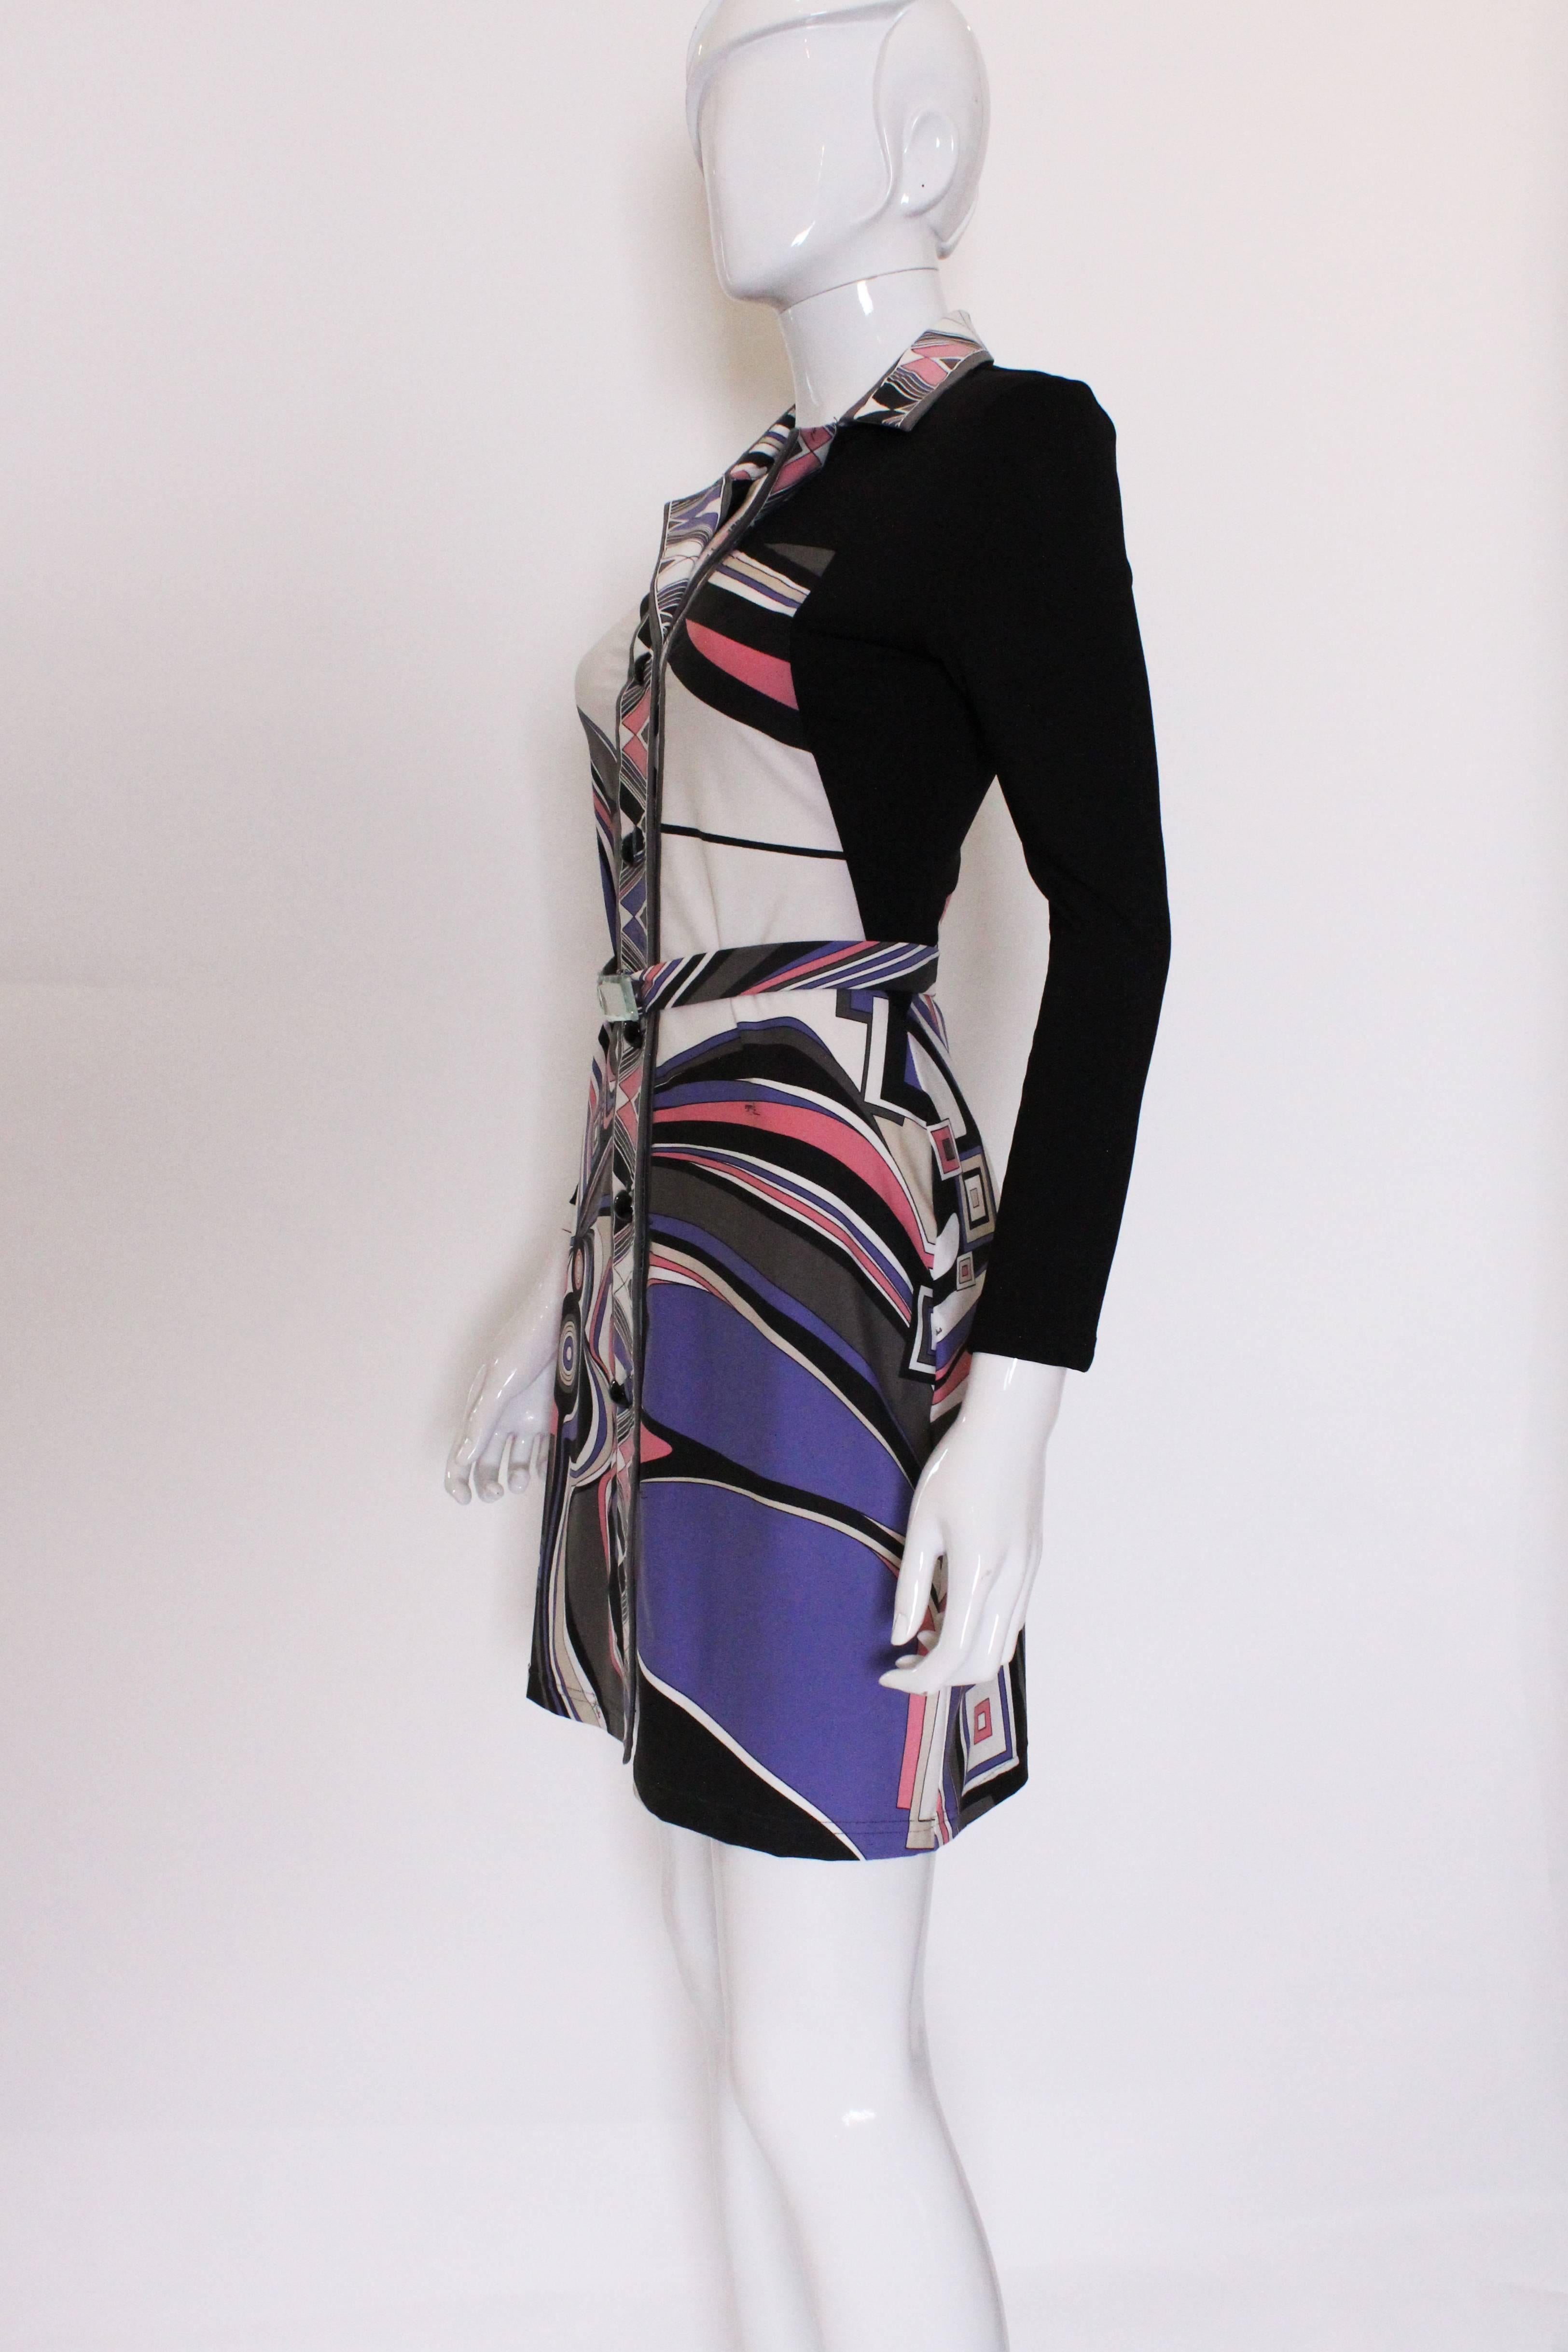 
A stylish and easy to wear shirt dress from Italian fashion house , Emilio Pucci.
In their 100% silk jersey, this dress is a great addition to your Spring /Summer wardrobe.It has a black background , with a wonderful colour mix that includes